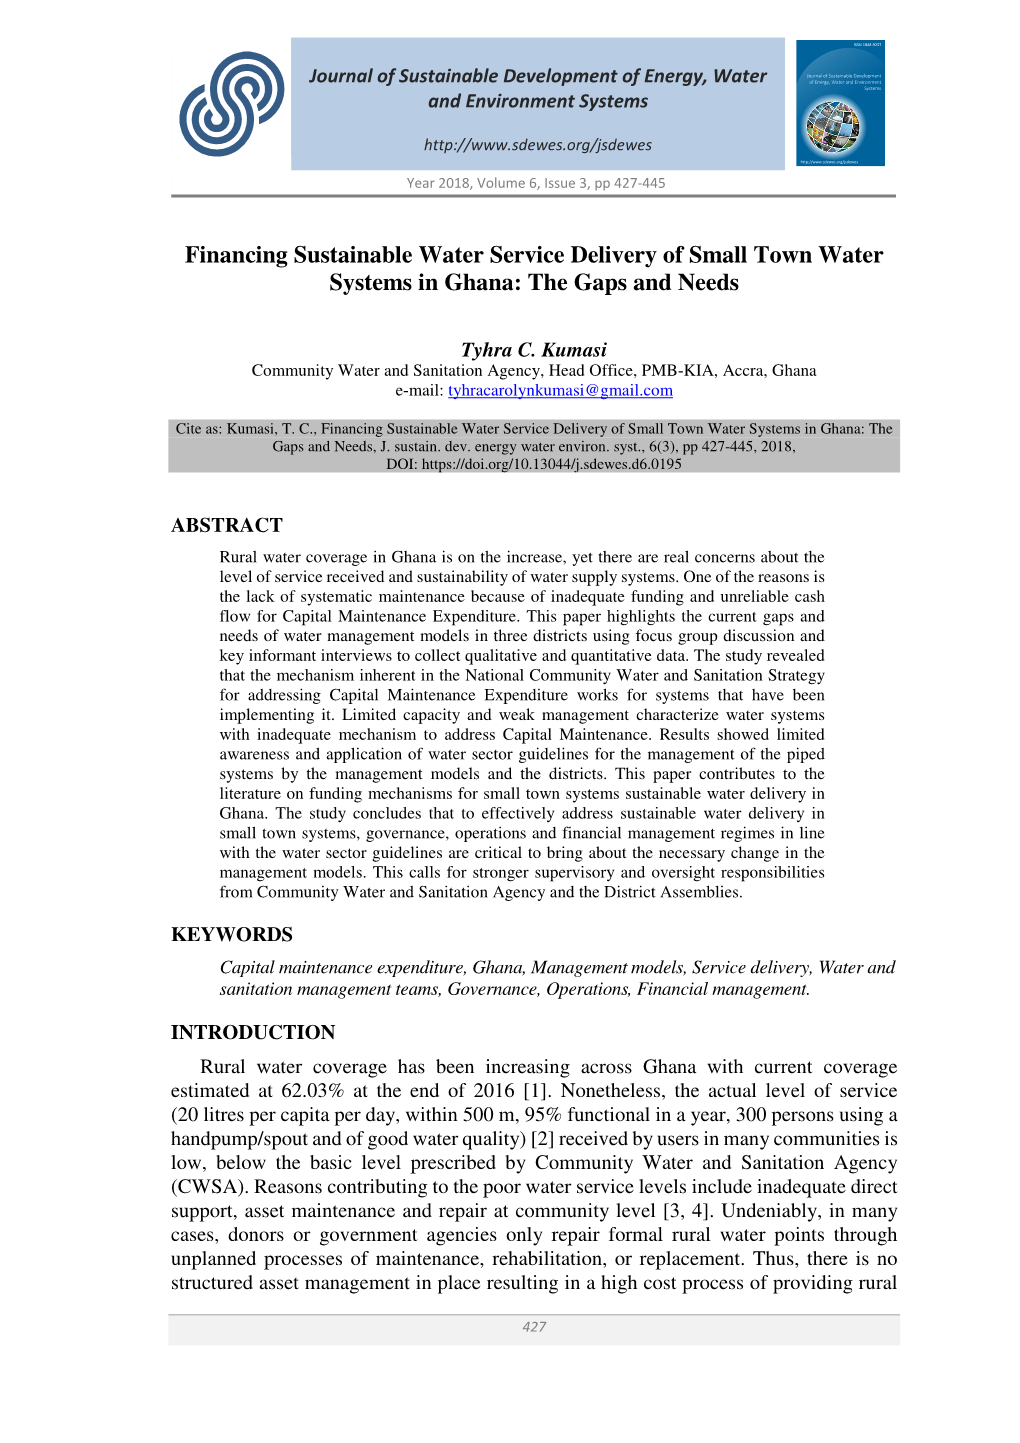 Financing Sustainable Water Service Delivery of Small Town Water Systems in Ghana: the Gaps and Needs